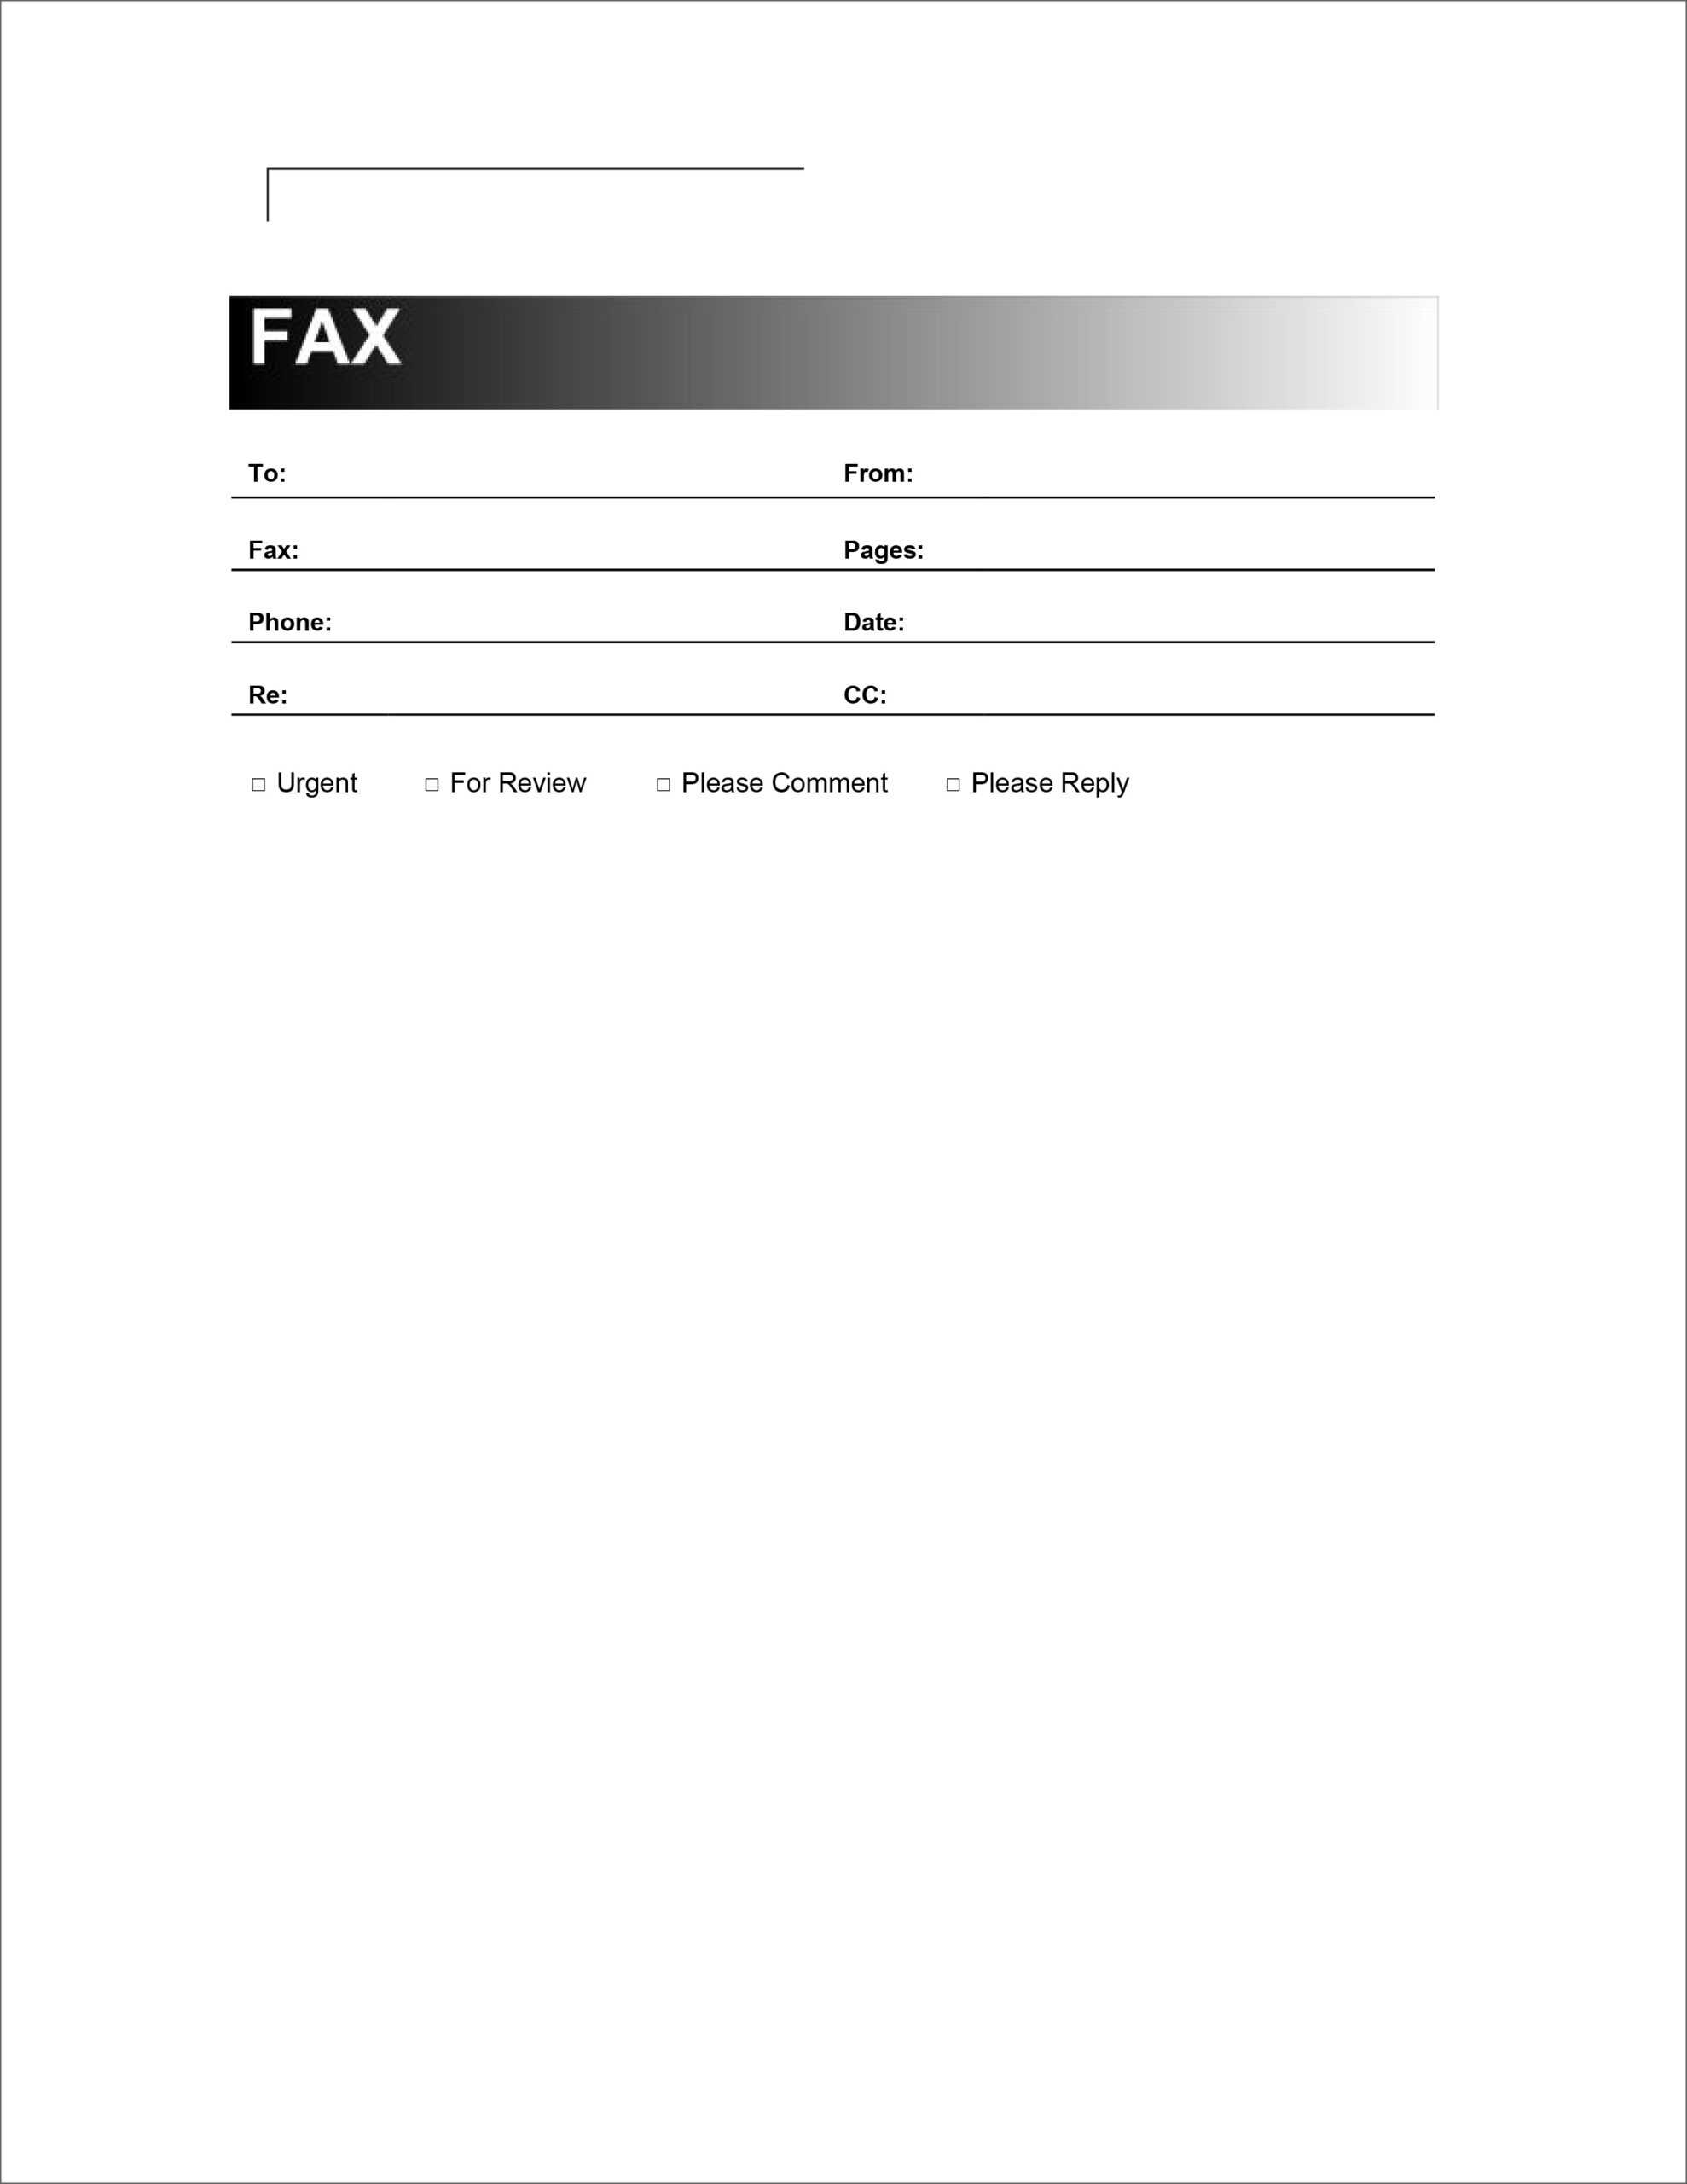 Microsoft Word Fax Cover Sheet – Milas.westernscandinavia Intended For Fax Template Word 2010